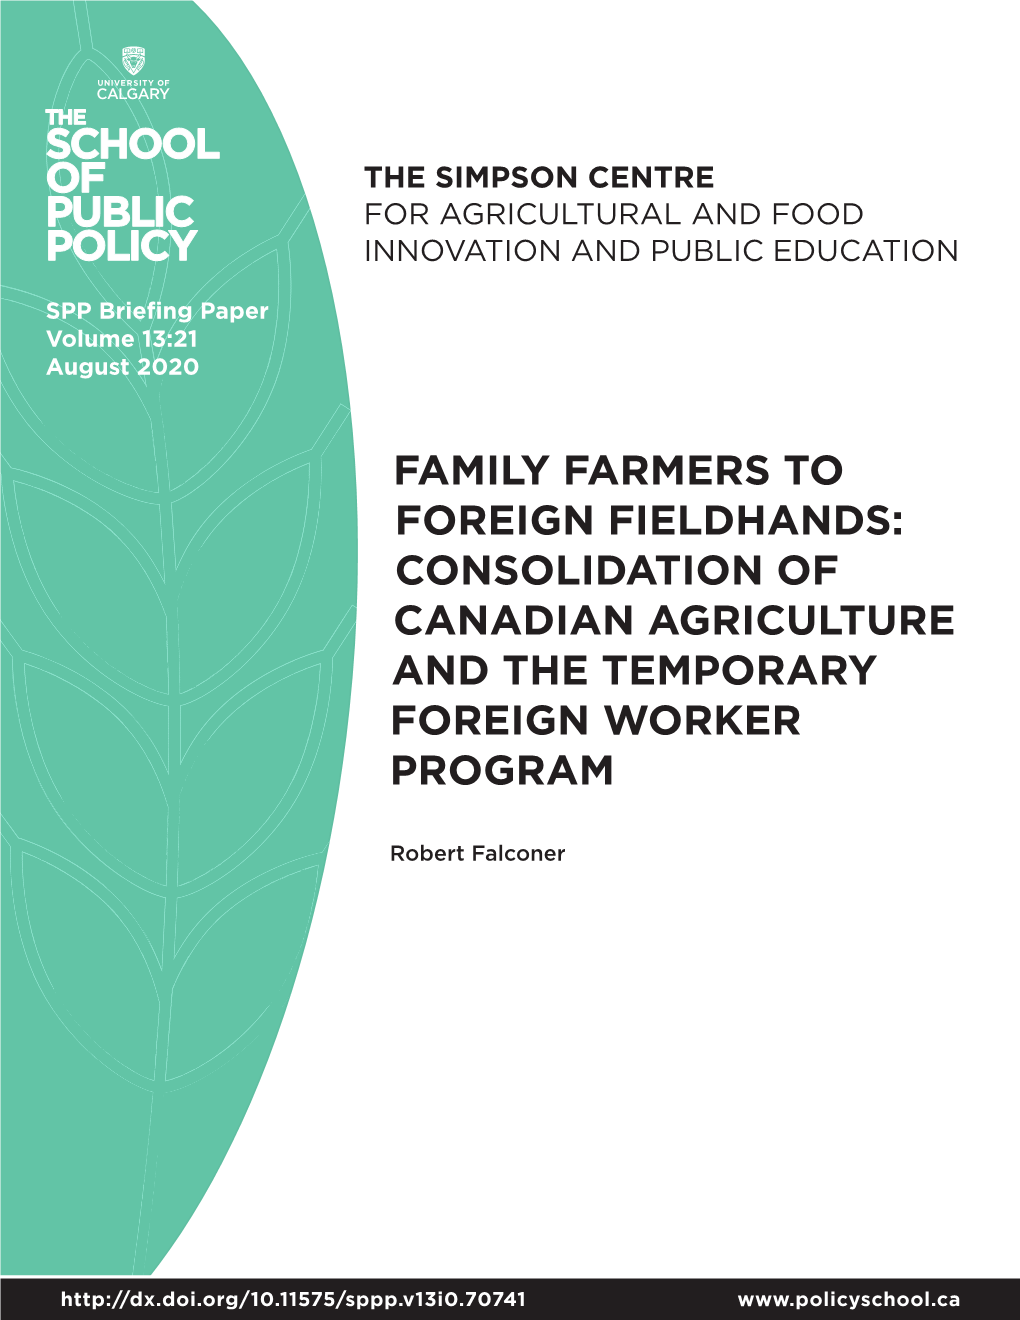 Consolidation of Canadian Agriculture and the Temporary Foreign Worker Program